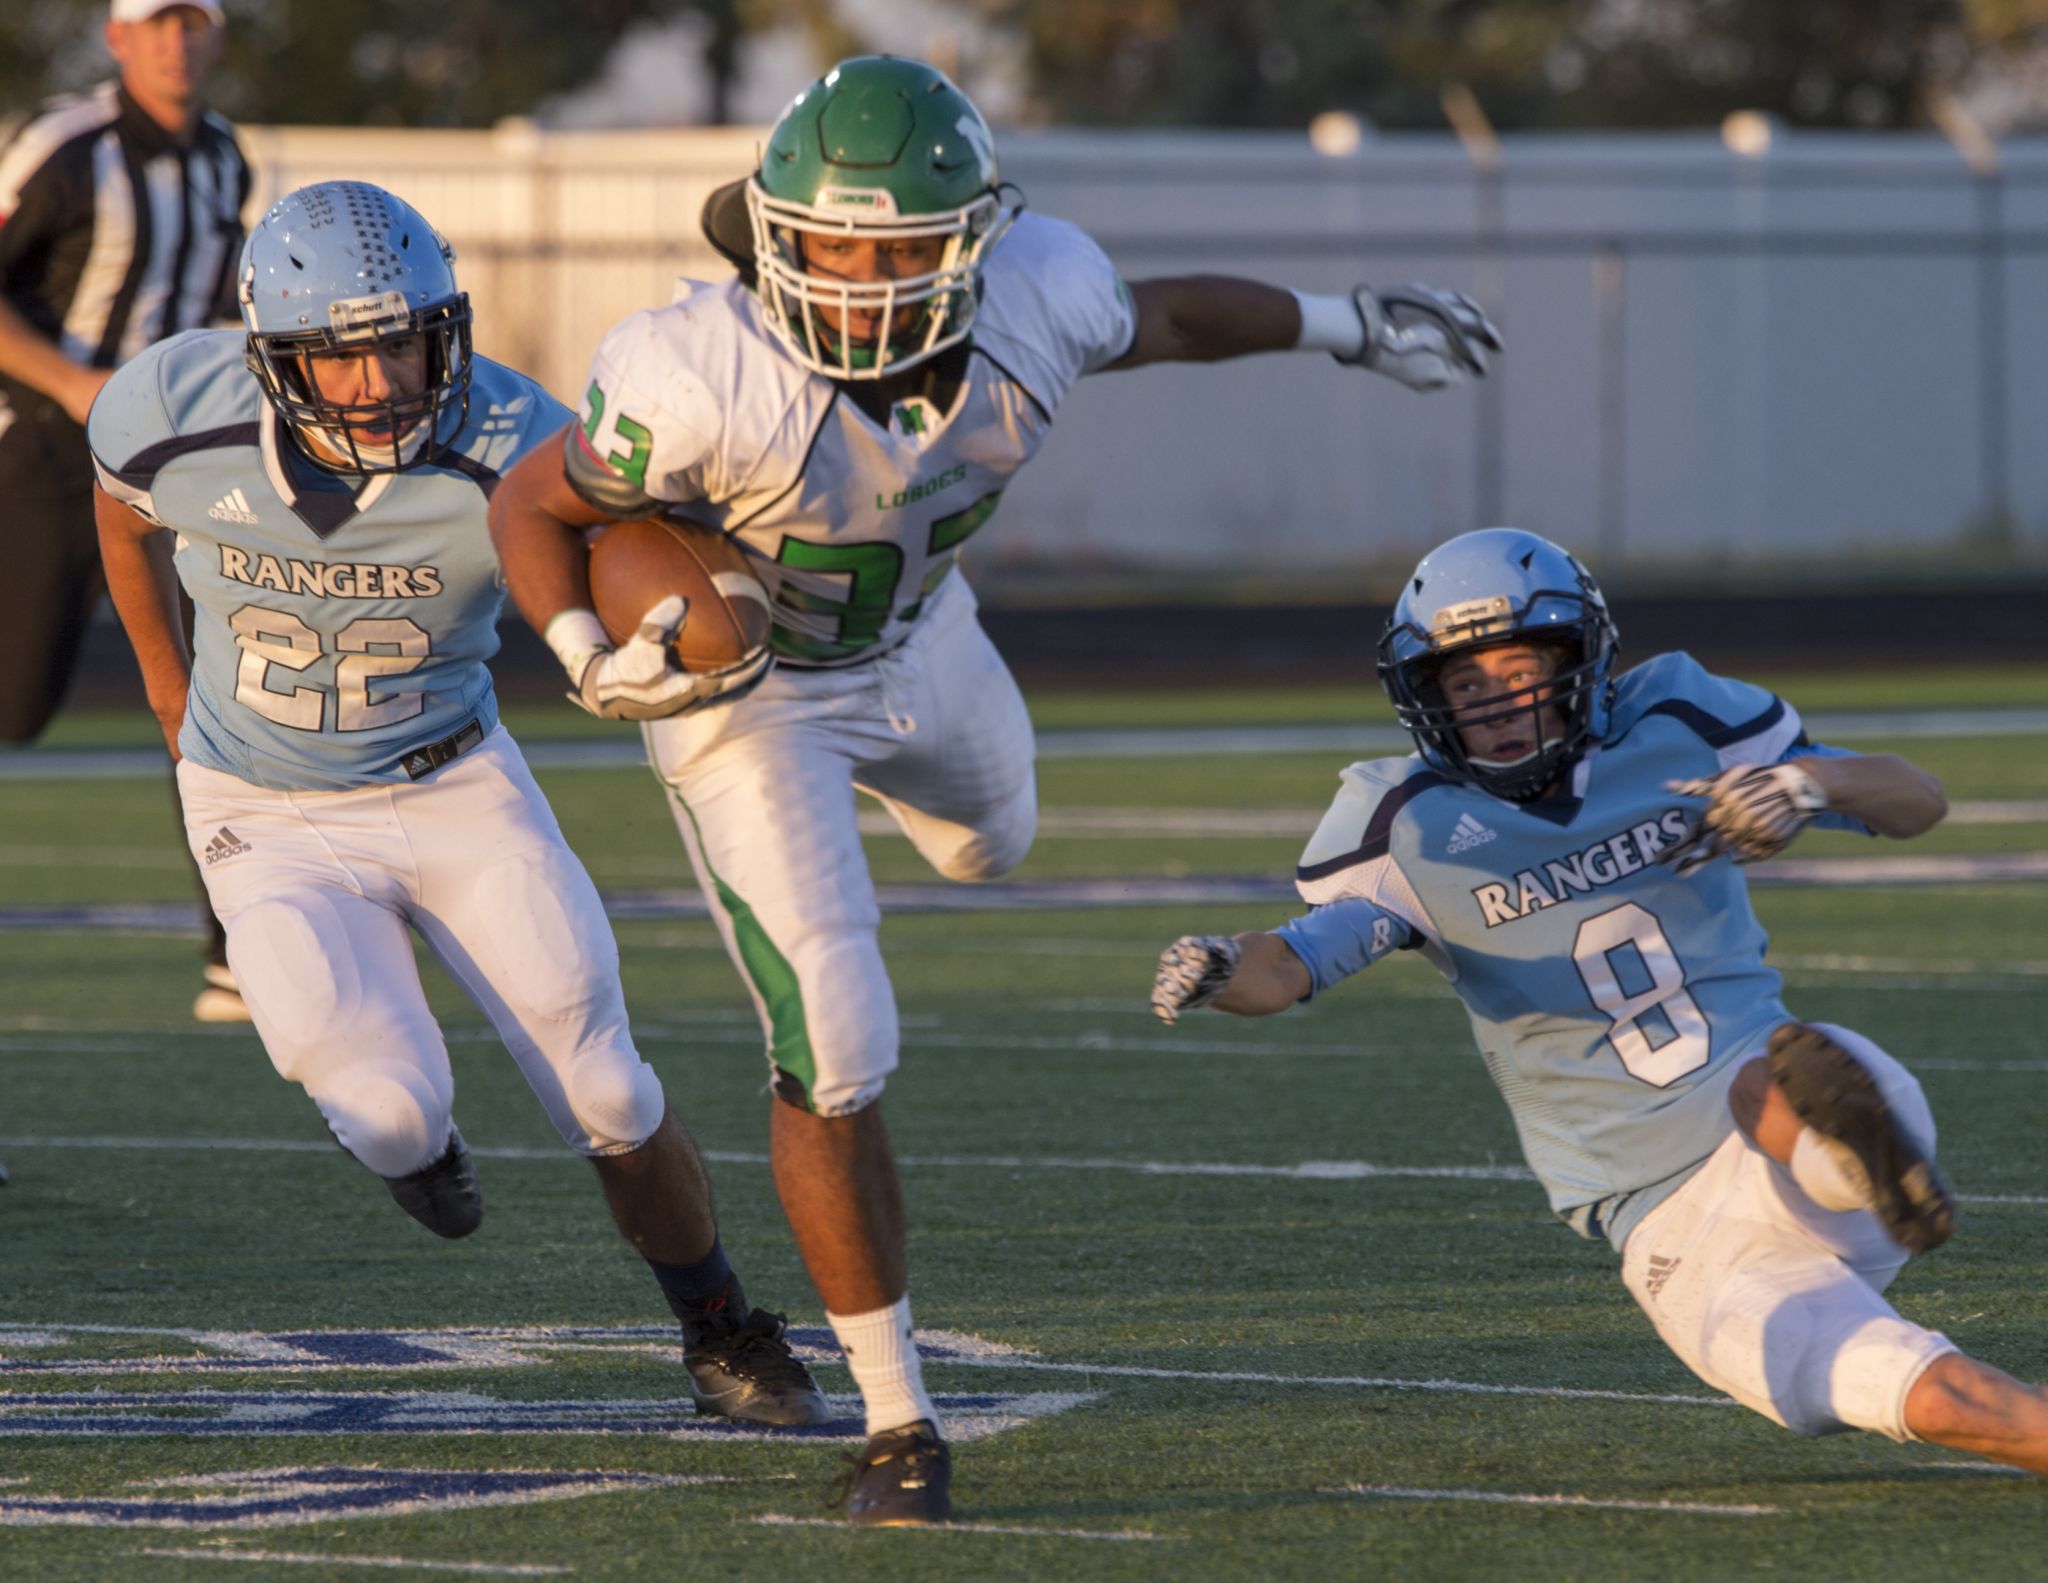 HS FOOTBALL: McCalister helps Monahans push past Greenwood